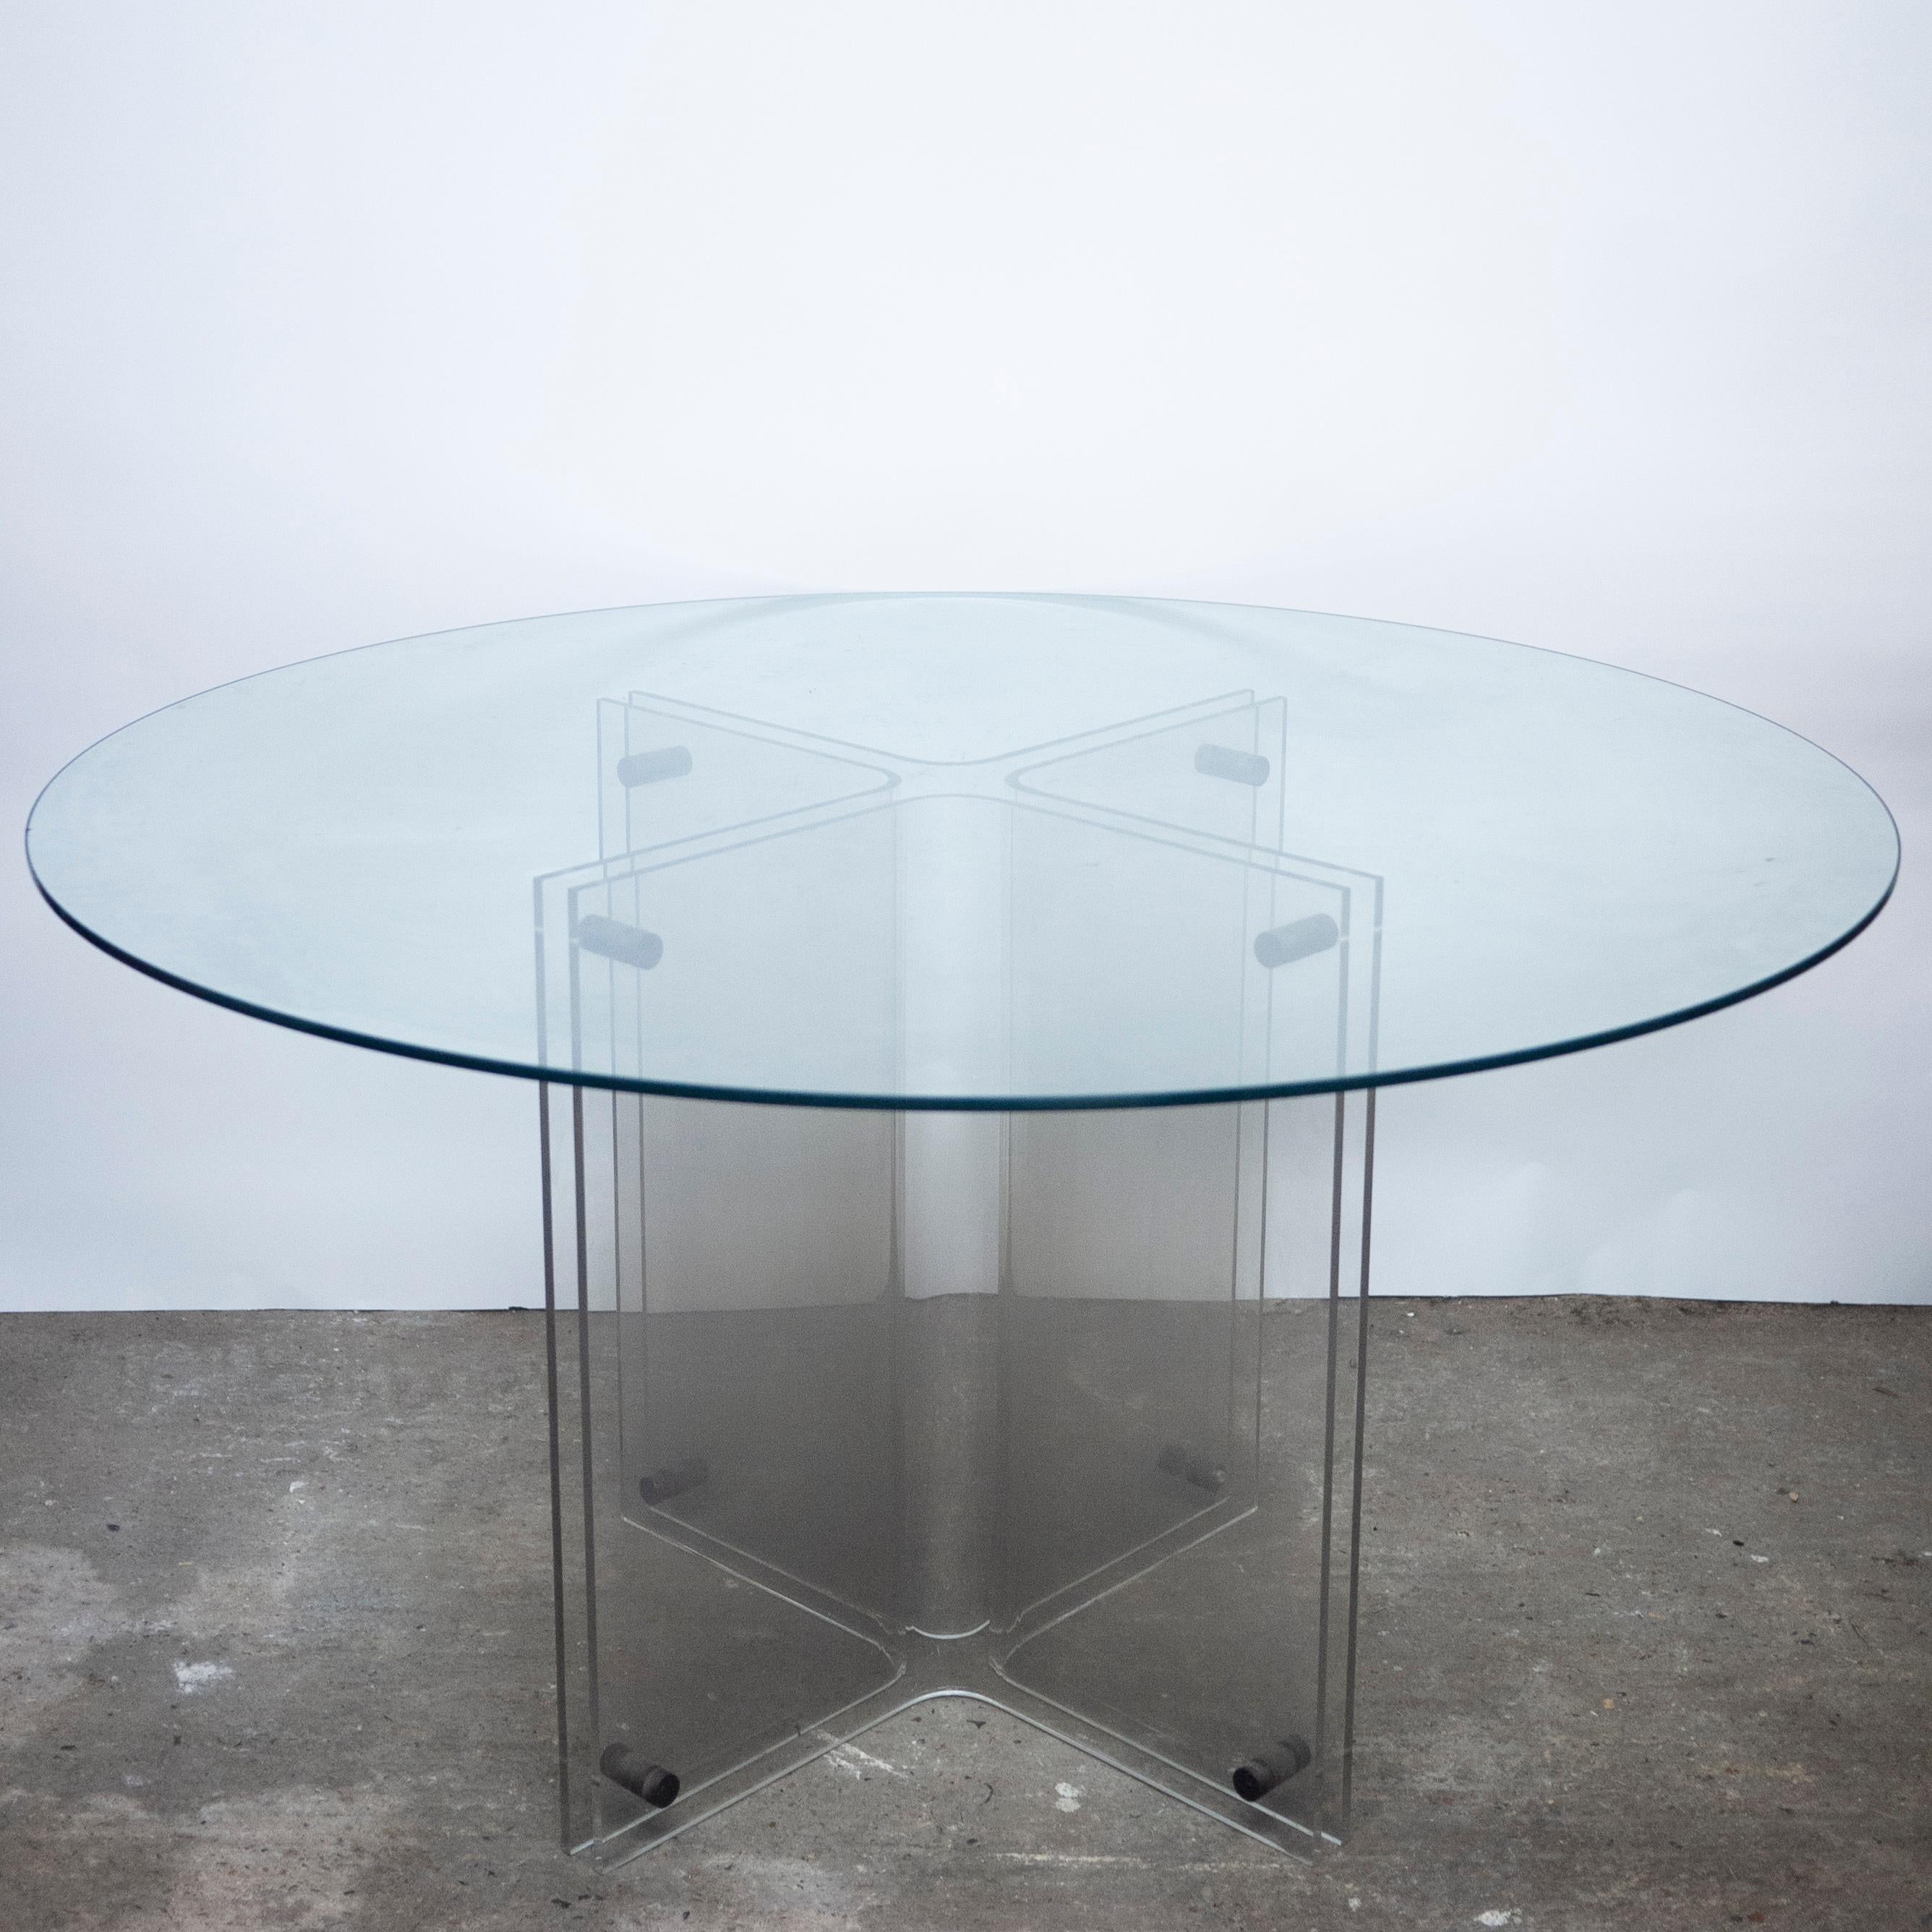 Vintage Hollywood Regency Lucite and Glass Round Dining Table, 1980s For Sale 8